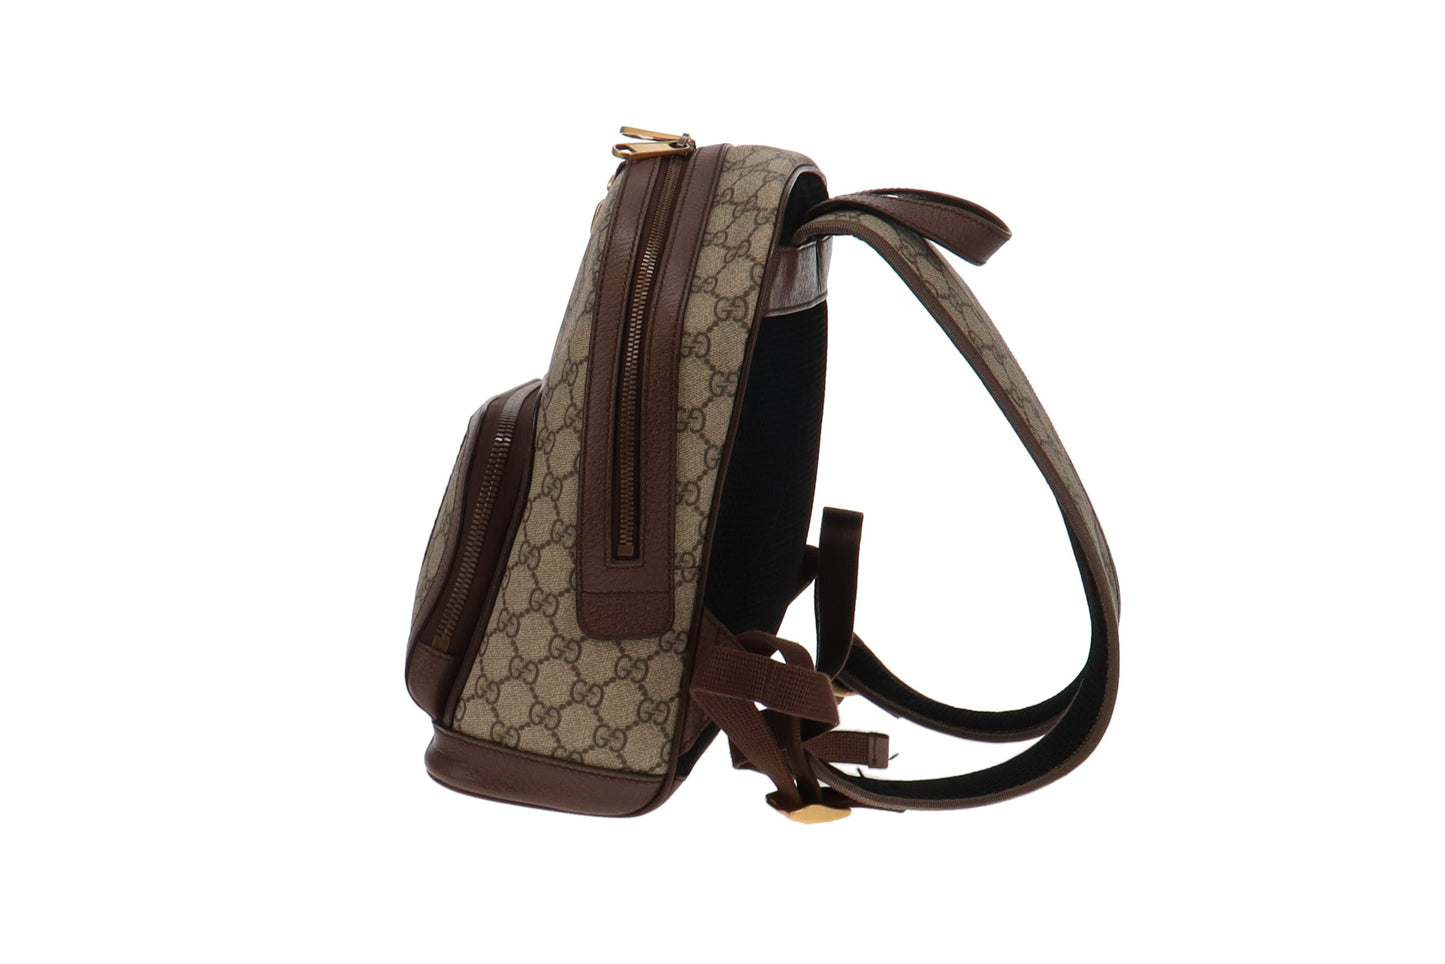 Gucci Ophidia Small GG Supreme Backpack